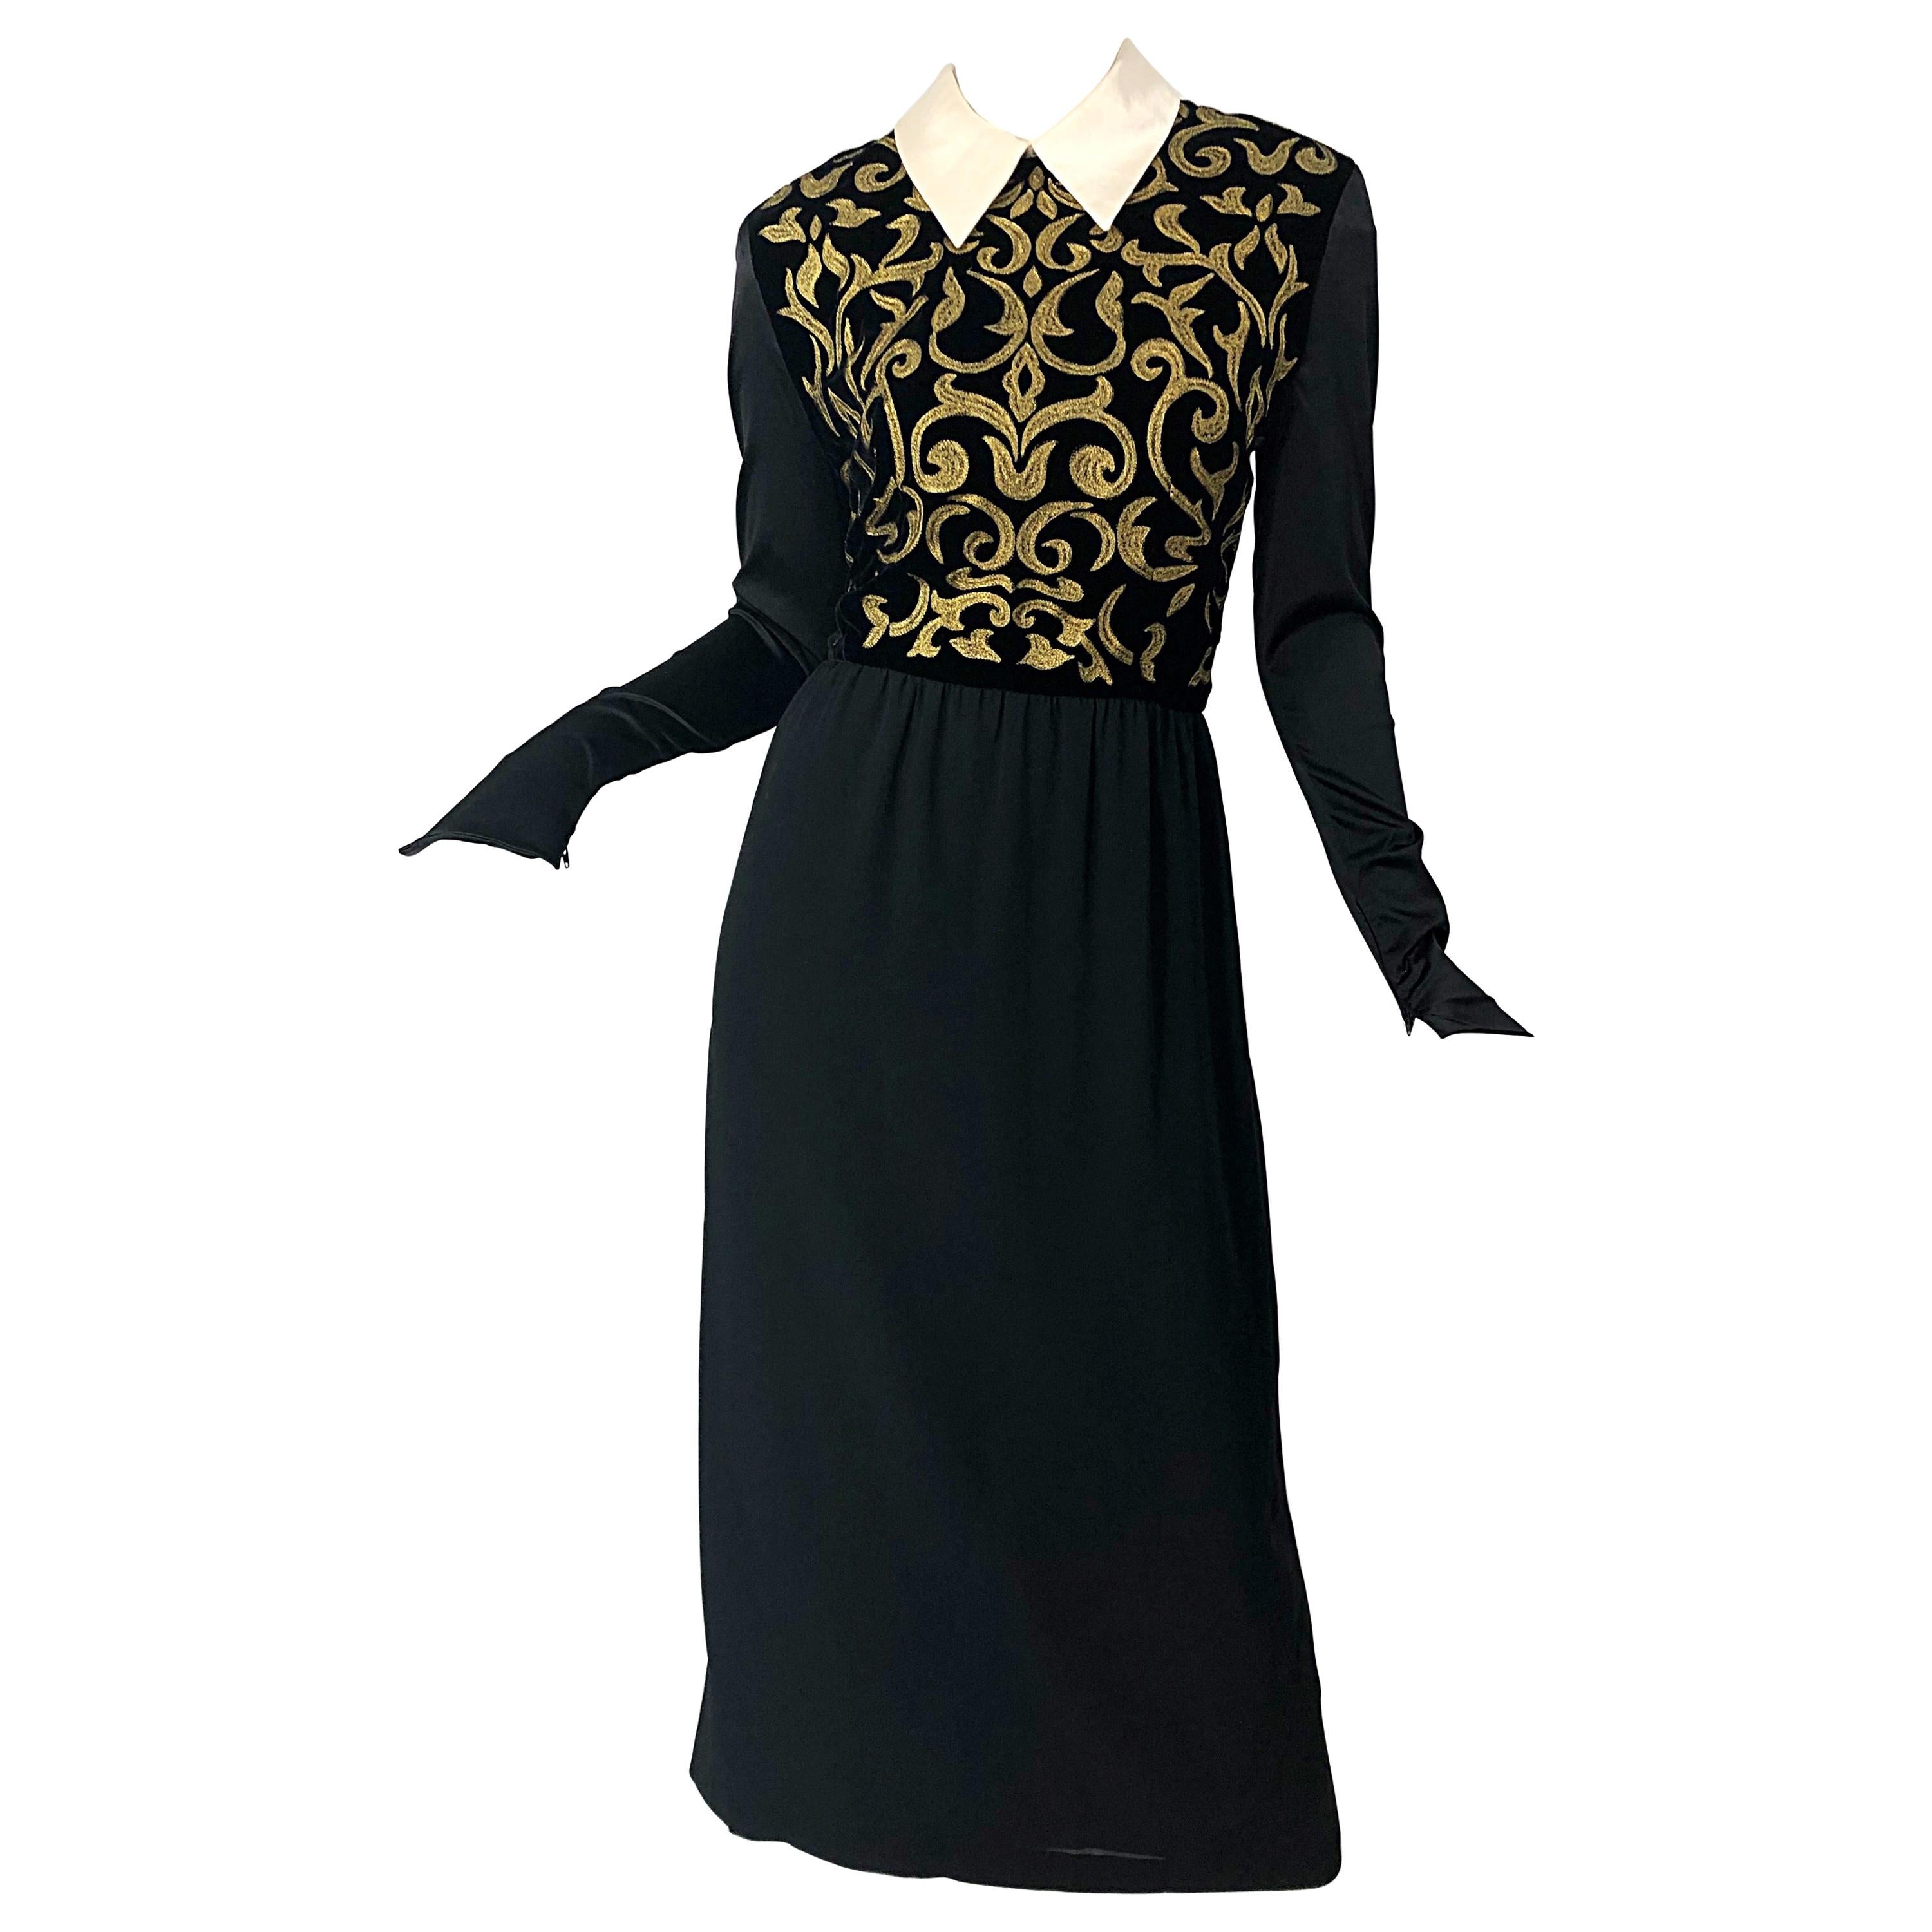 Karl Lagerfeld Runway Fall 1988 Black Gold Embroidered Vintage 80s Gown Dress For Sale